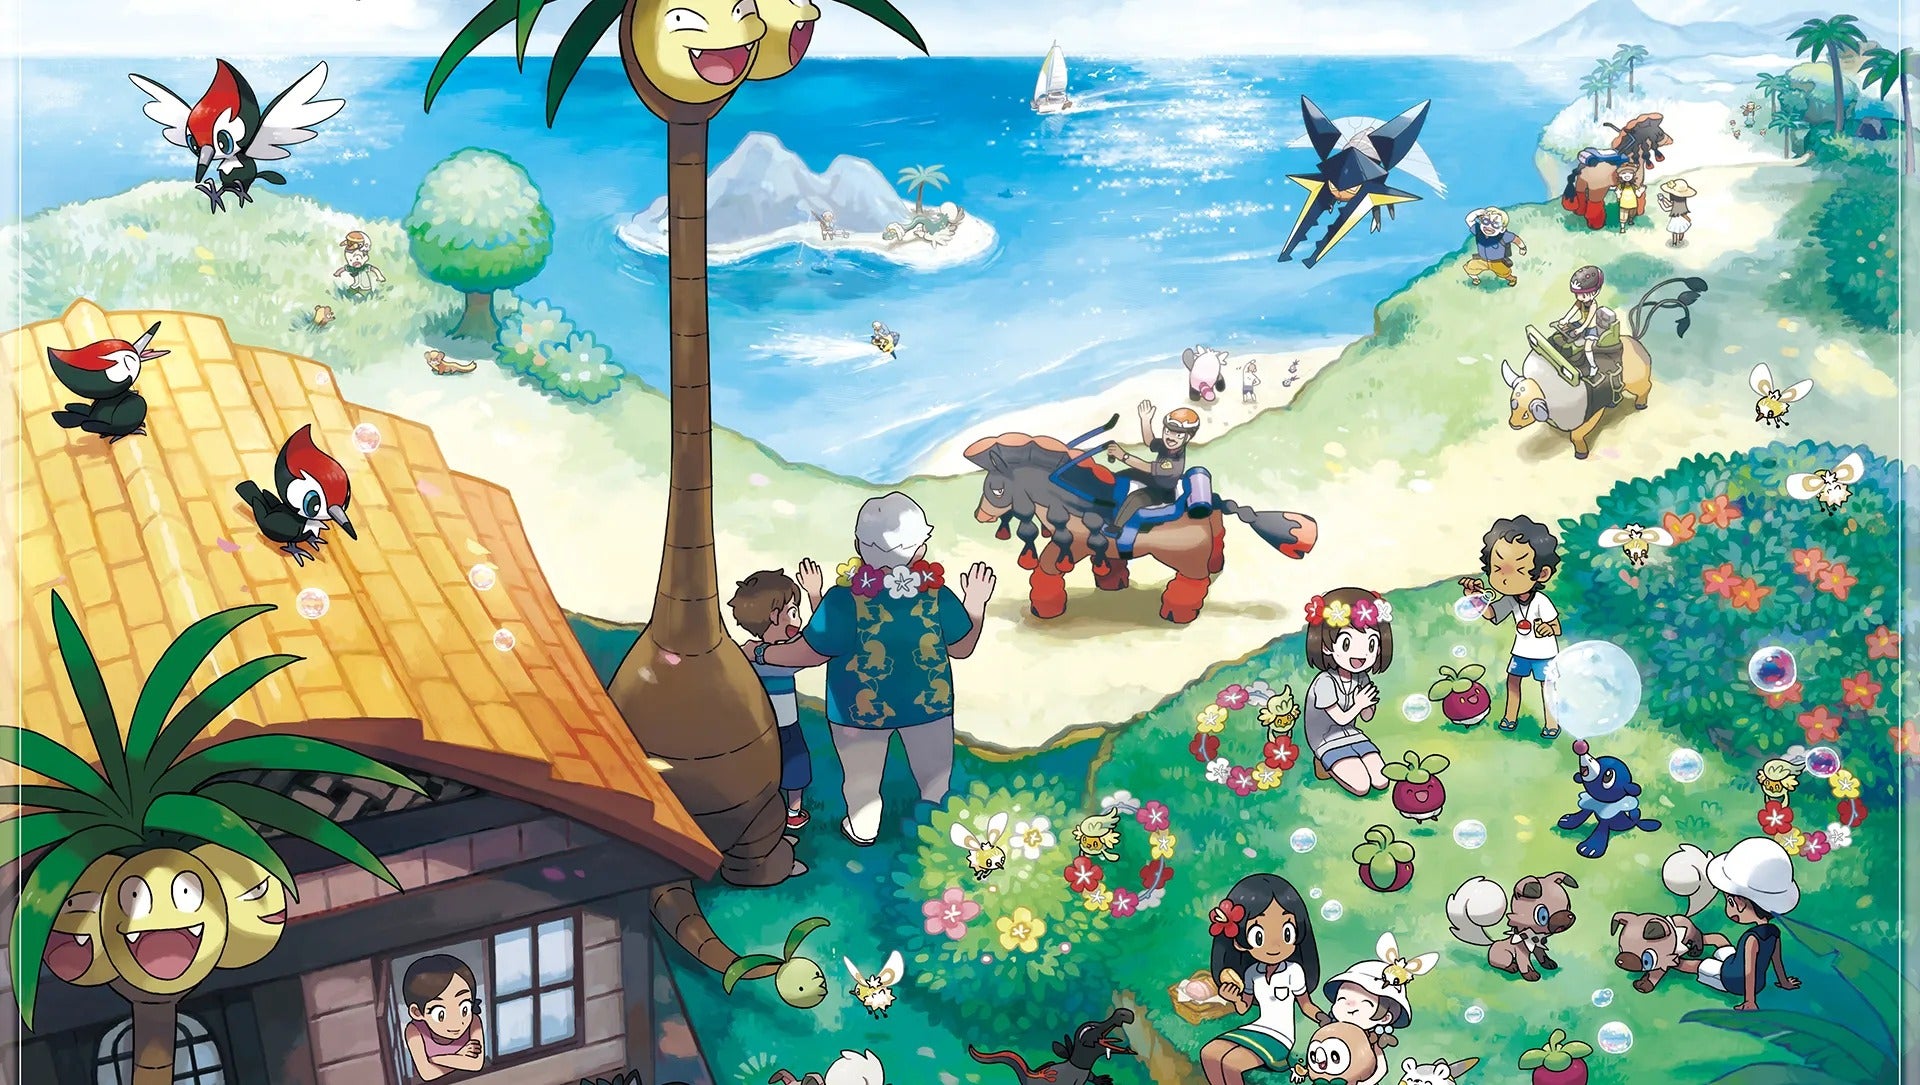 Sun and Moon brought a distinct culture through the introduction of the Alolan region. (Image: The Pokémon Company)